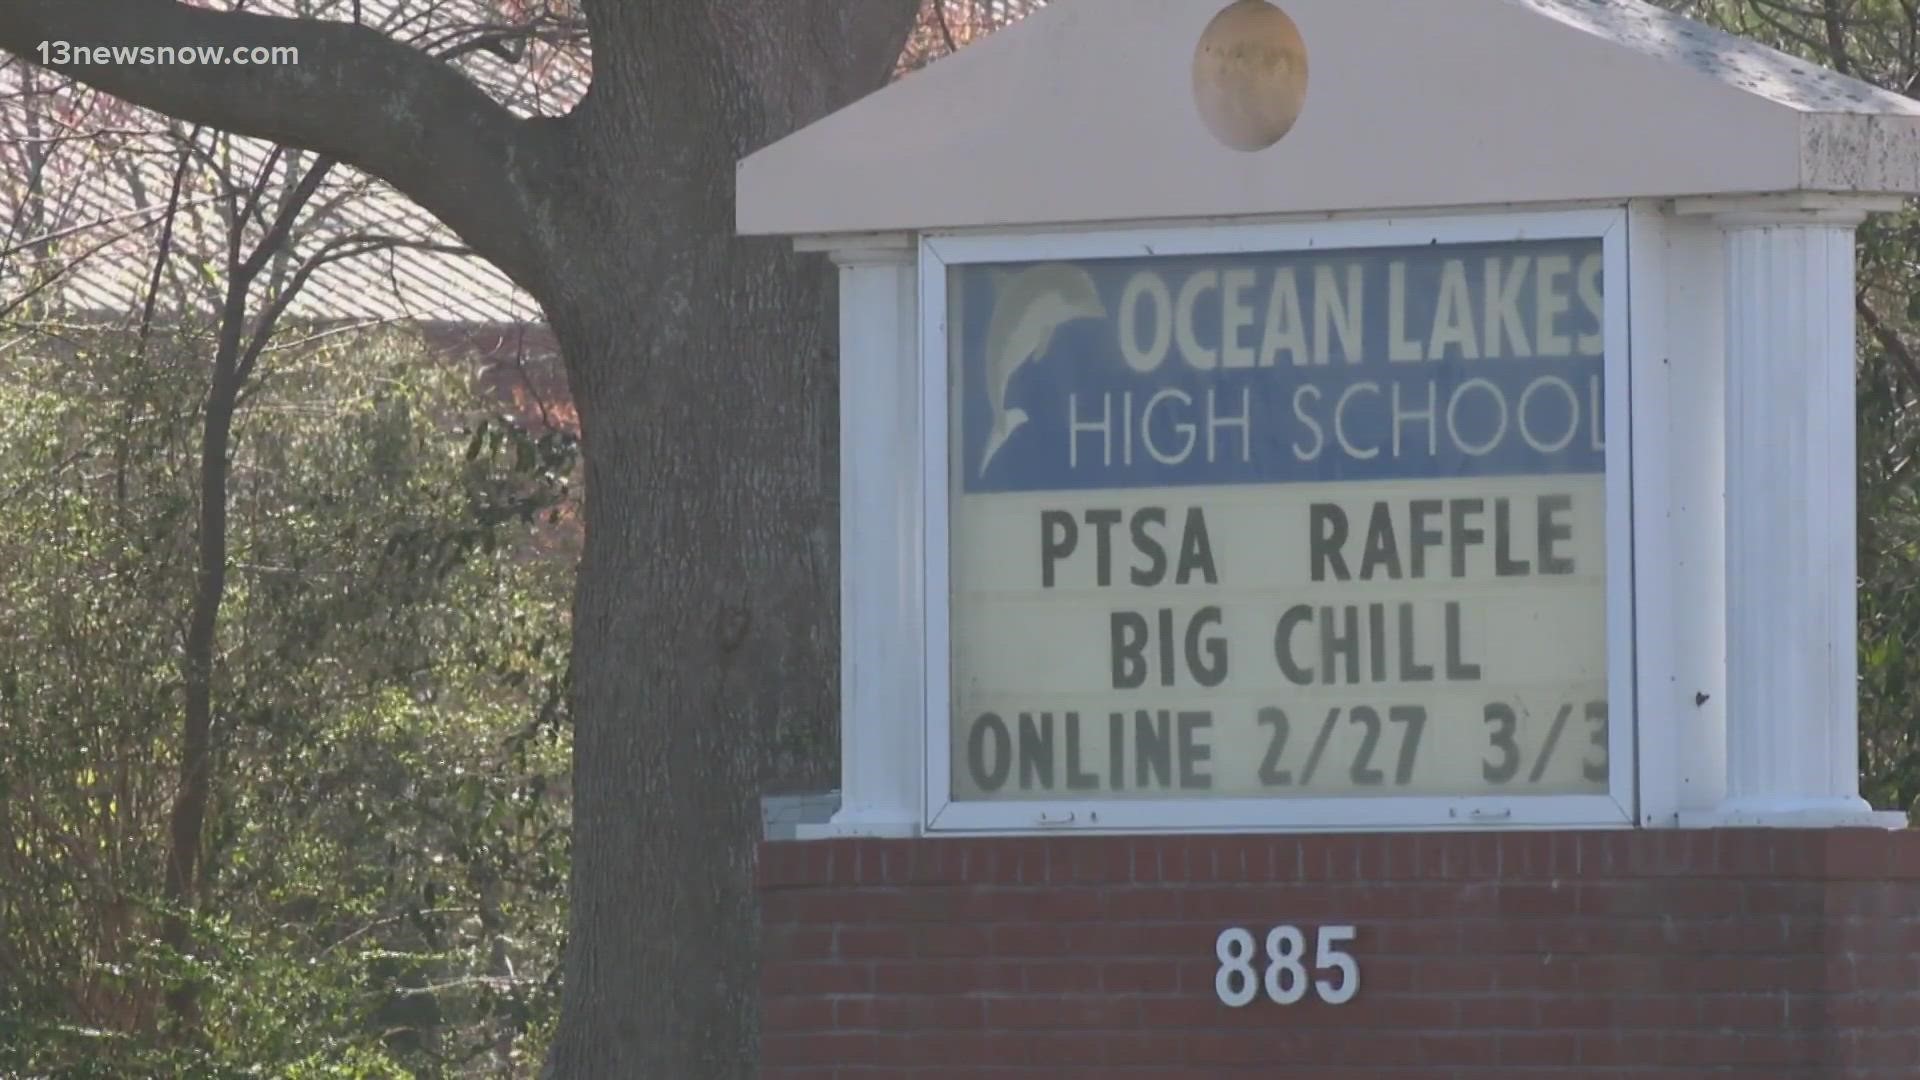 Investigators said it started when someone reported the threatening comments Thursday morning. School Resource Officers did not find any weapons on school grounds.